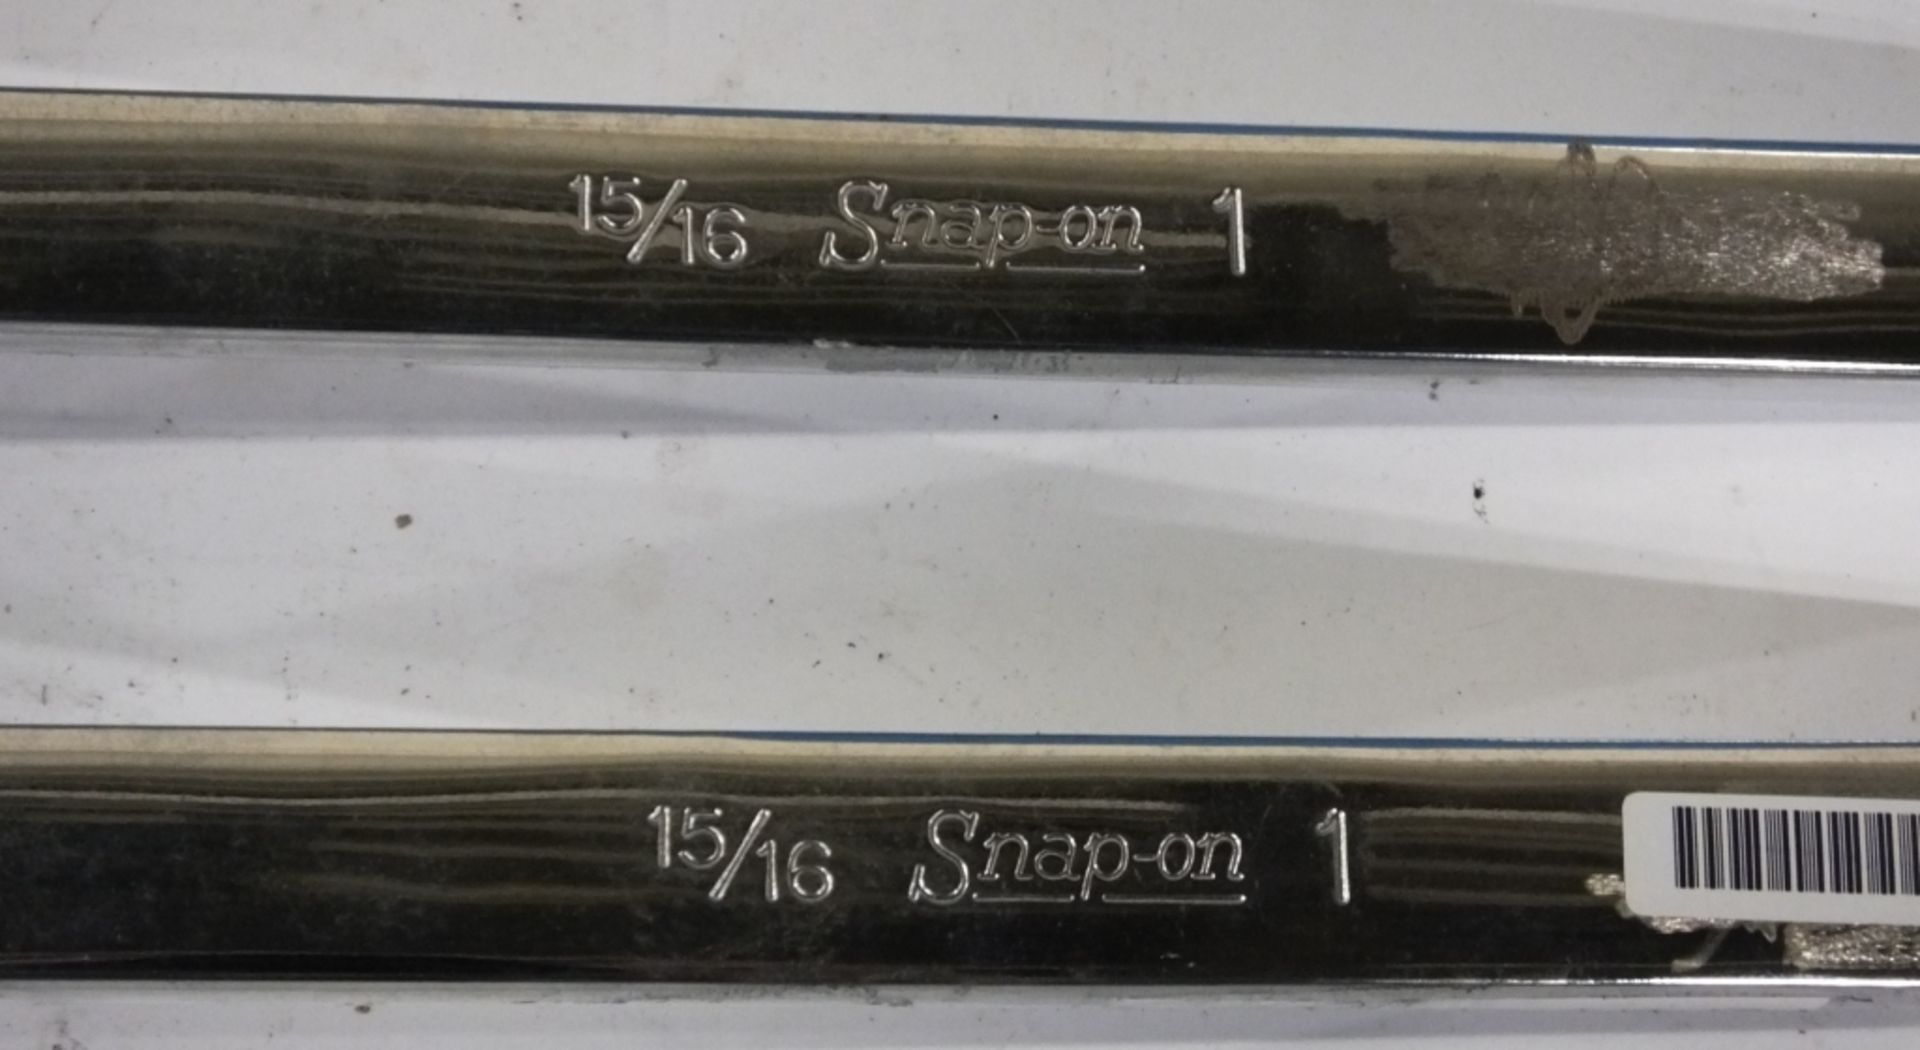 2x Snap-On ring spanners - 15/16 - Image 2 of 3